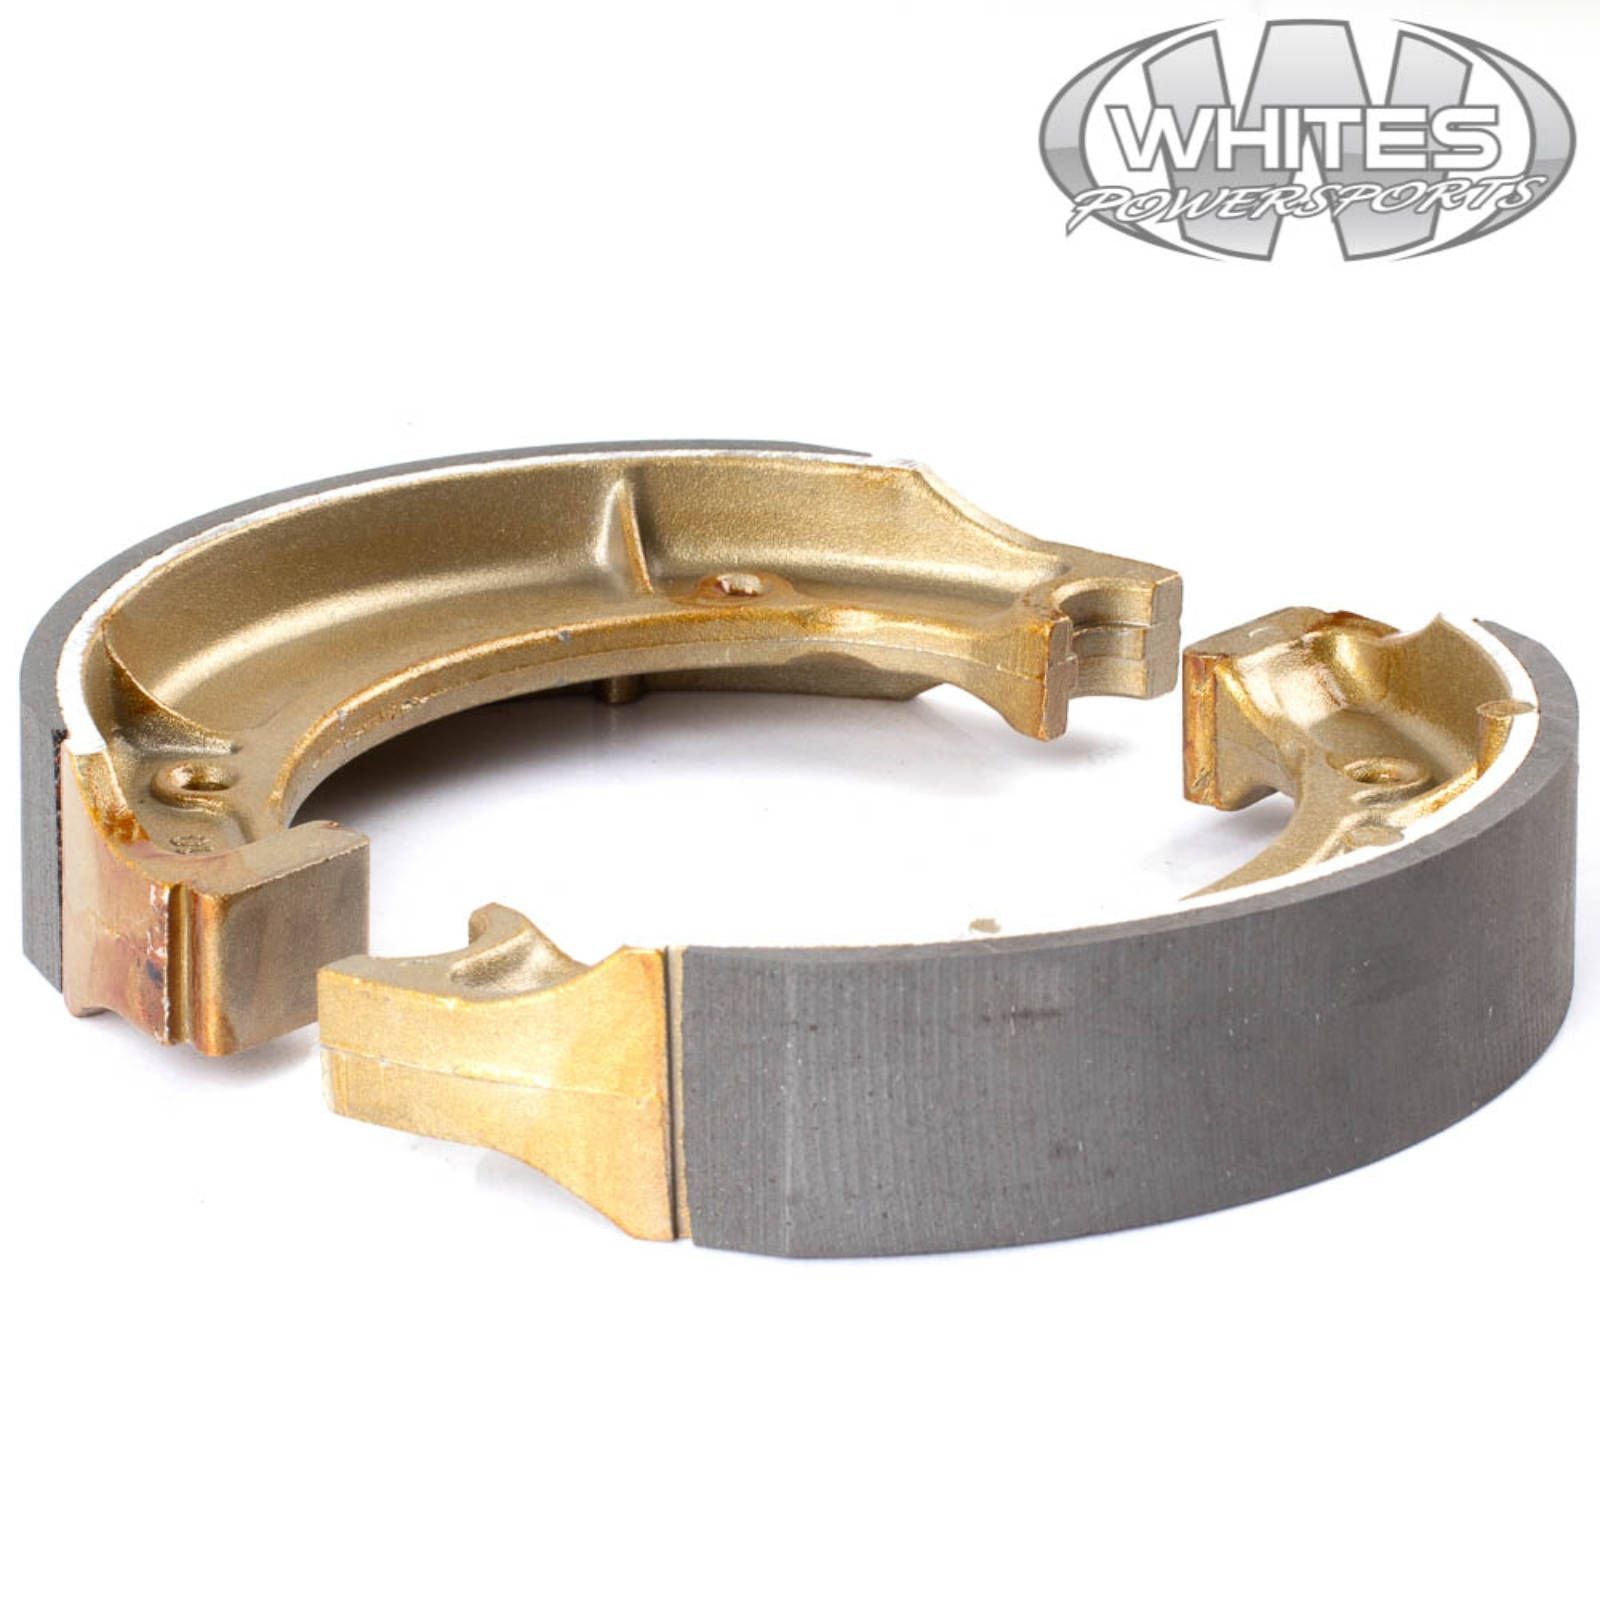 New WHITES Motorcycle Brake Shoes #WPBS27209